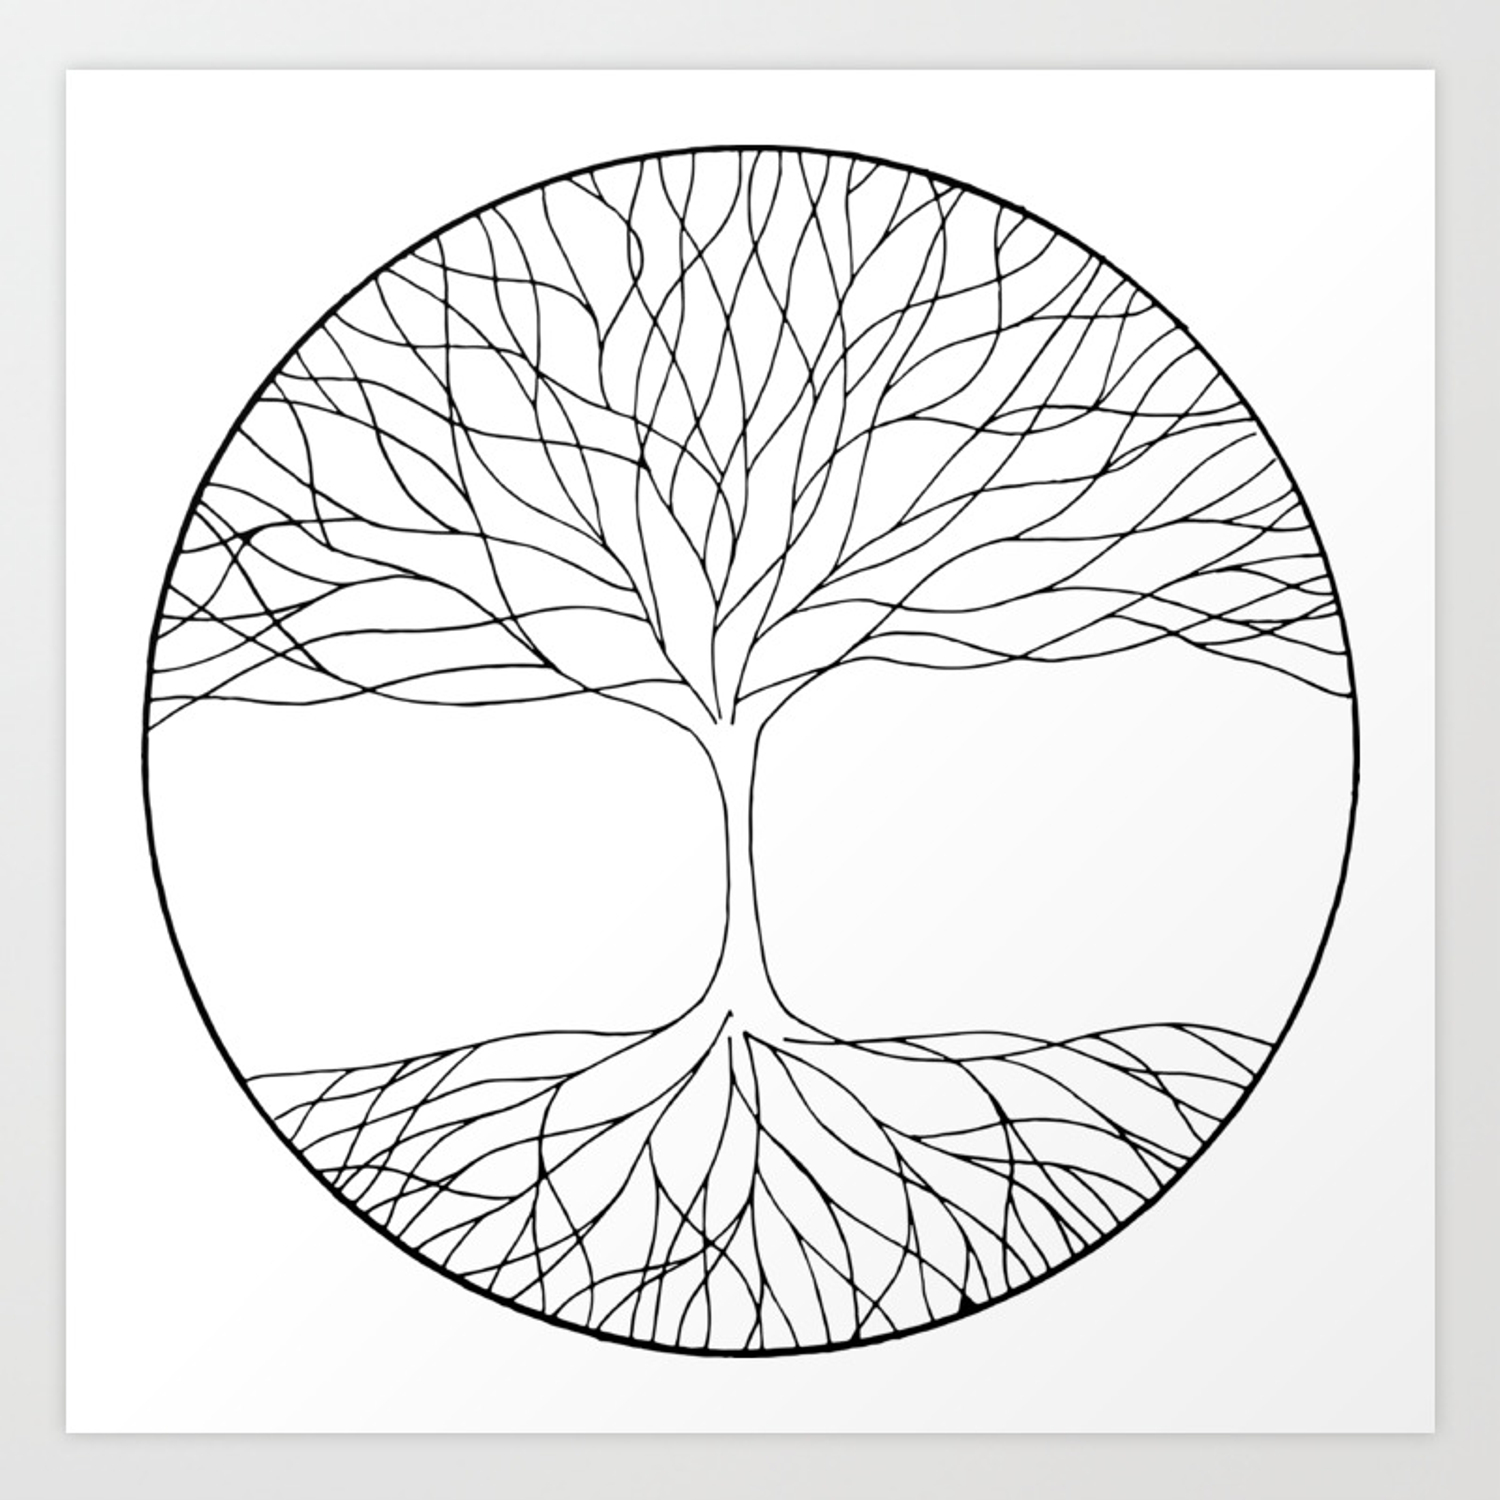 Tree of life images artwork